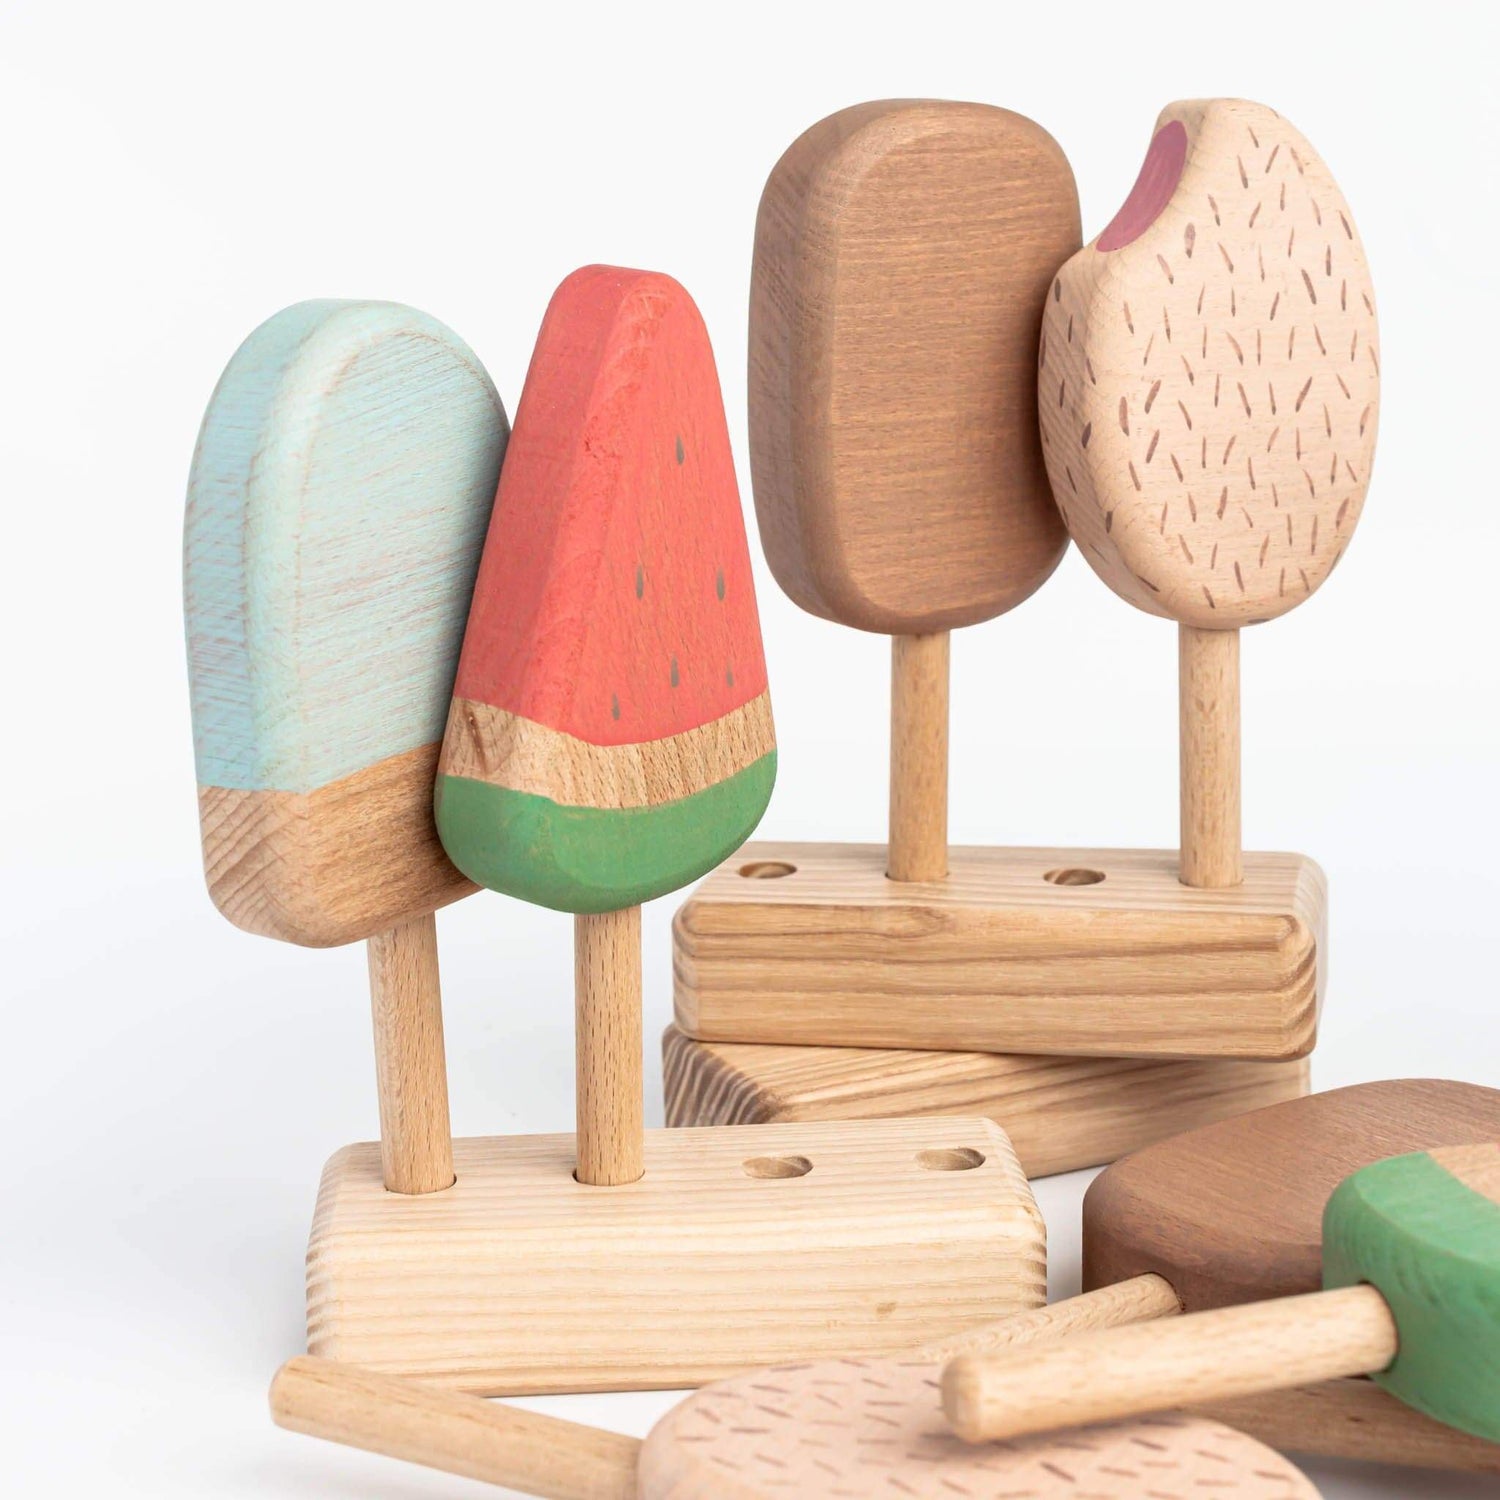 4OurBaby Wooden Toys Handmade Wooden Ice Cream Set